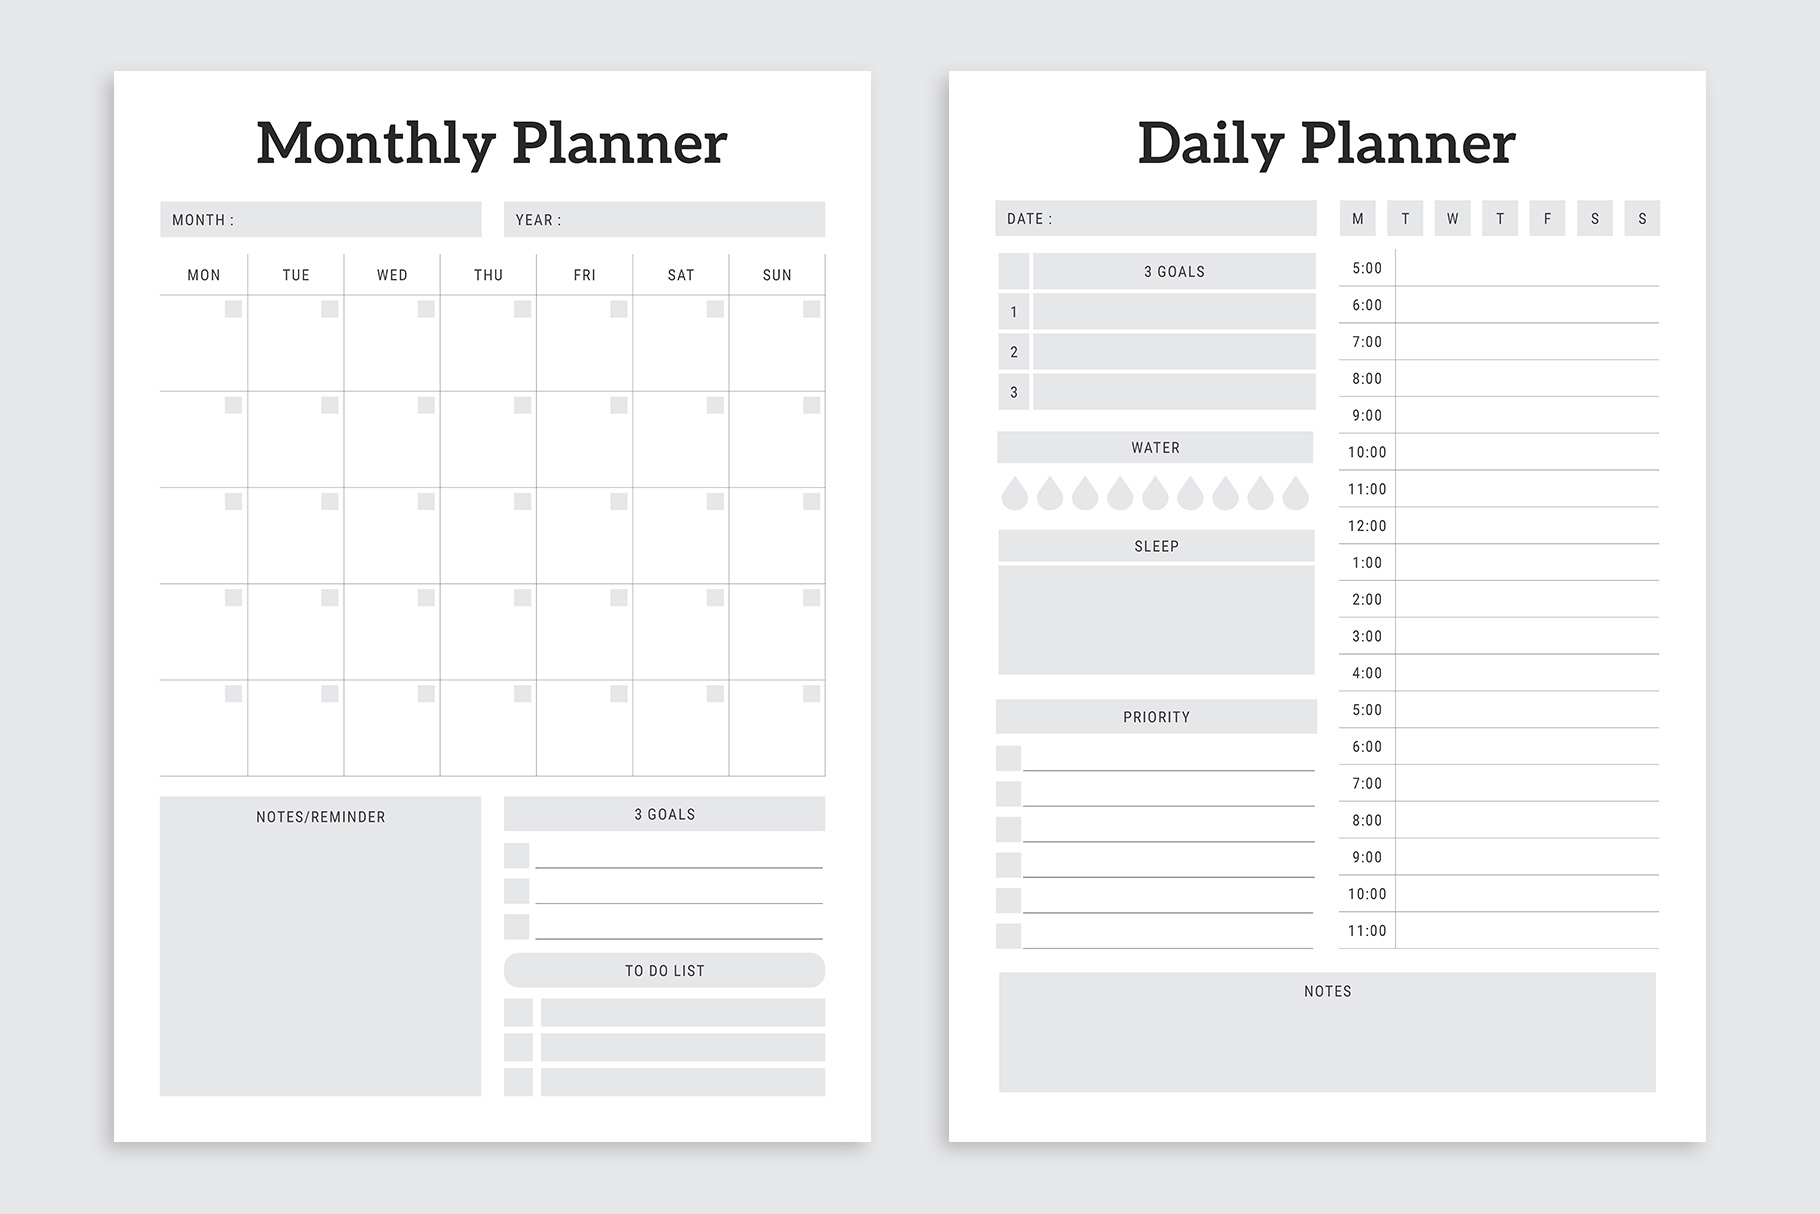 Monthly & Daily Planner designs.